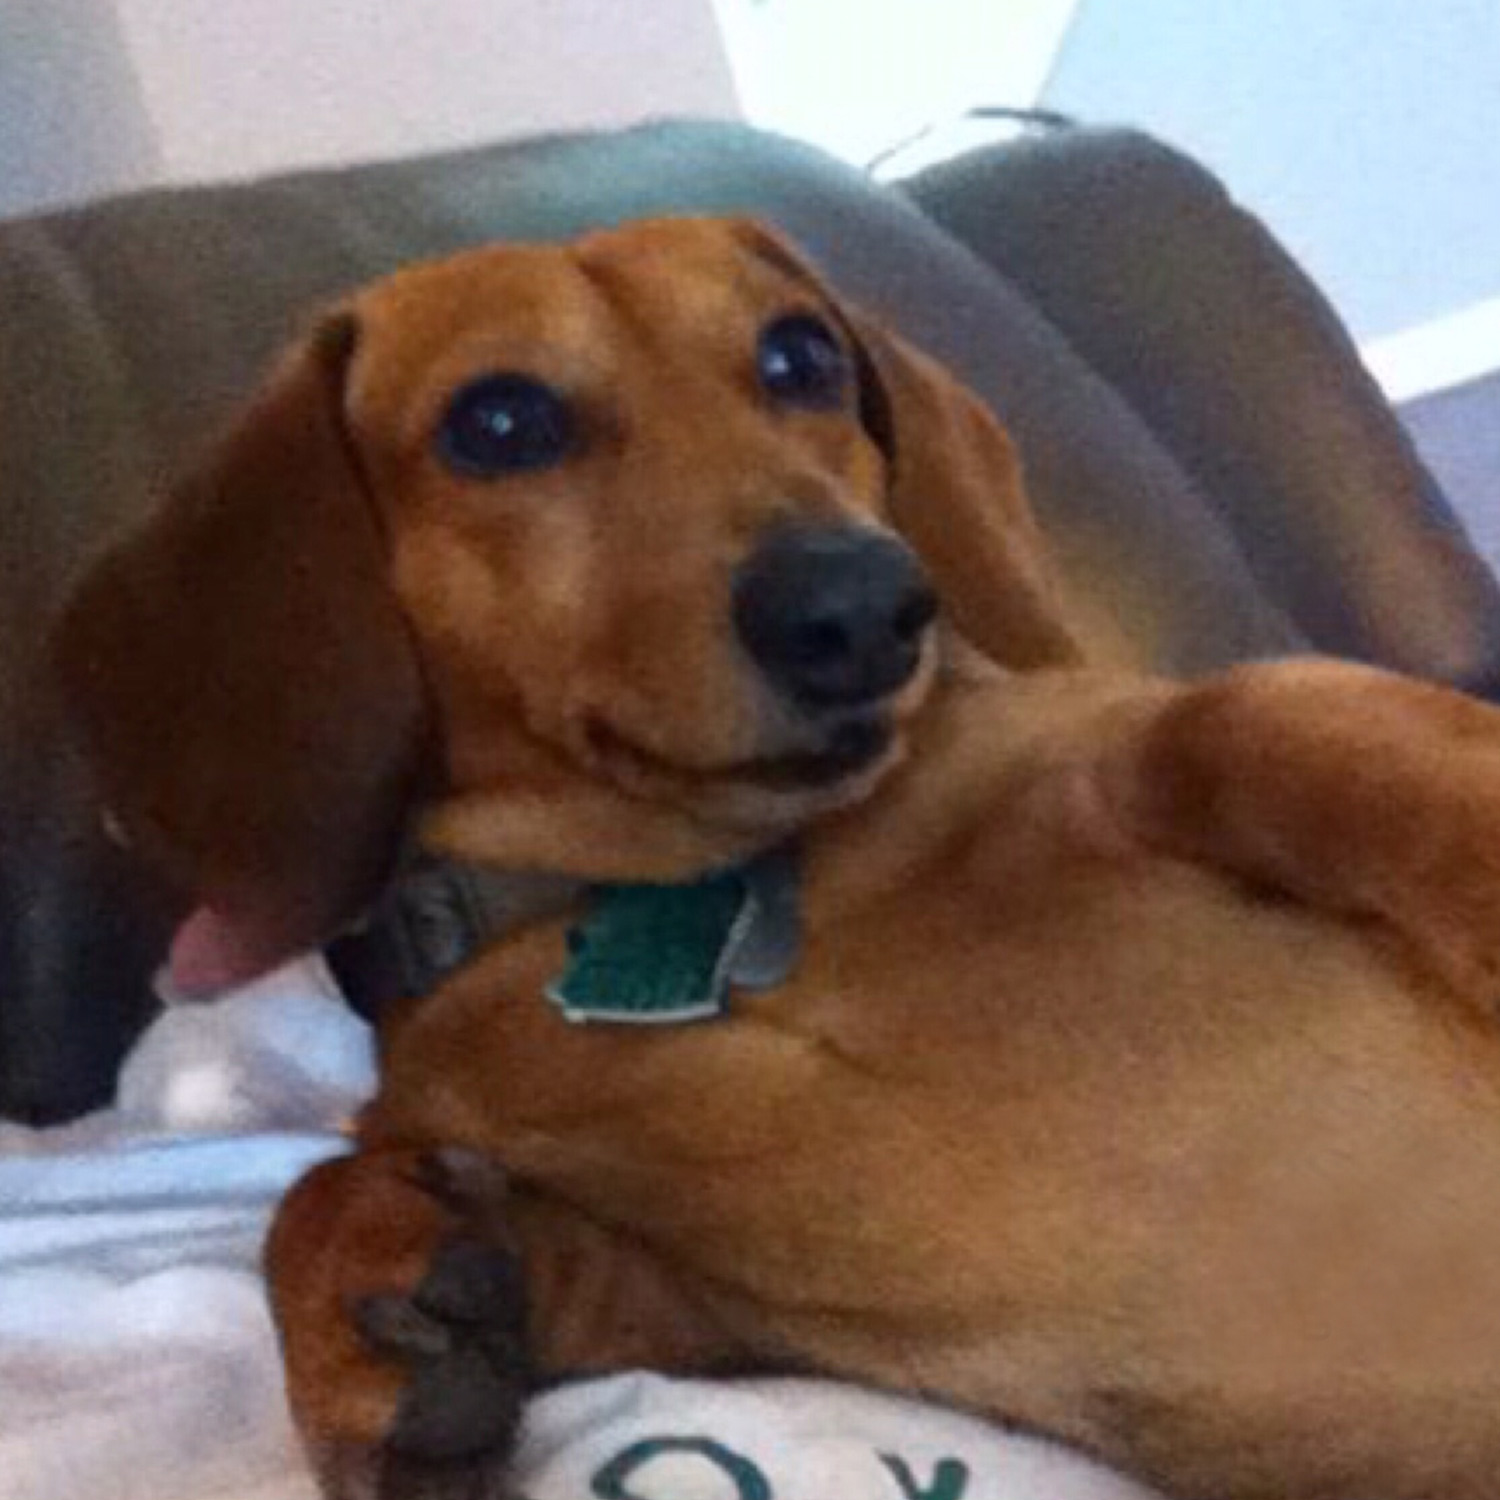 Cindy c Wanted to share her dachshund petey